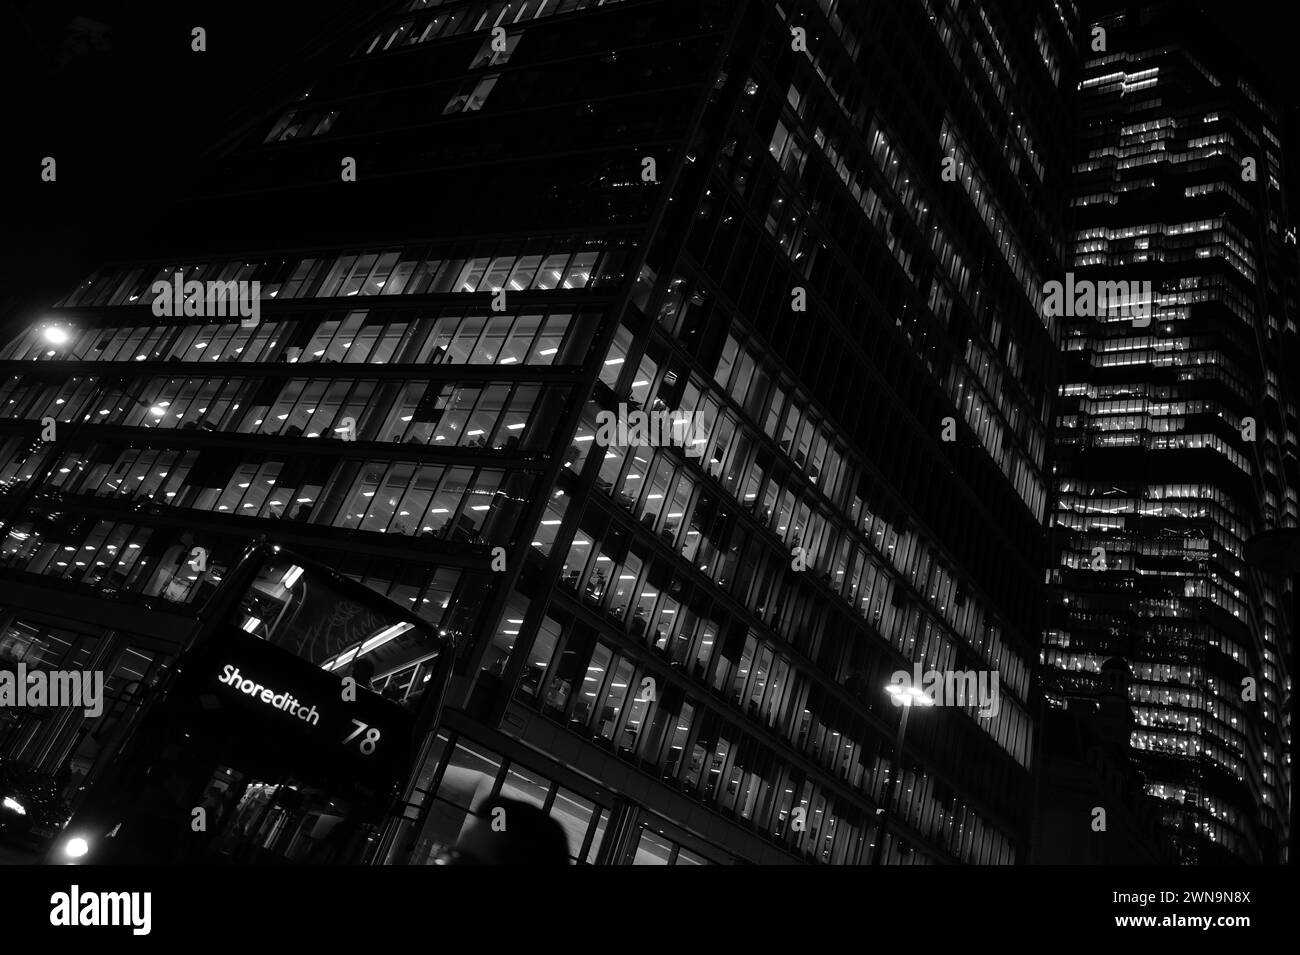 Powerful abstract monochrome architectural landscape of sky-scraper offices illuminated at night on Bishopsgate near Liverpool Street in the City of London. Stock Photo